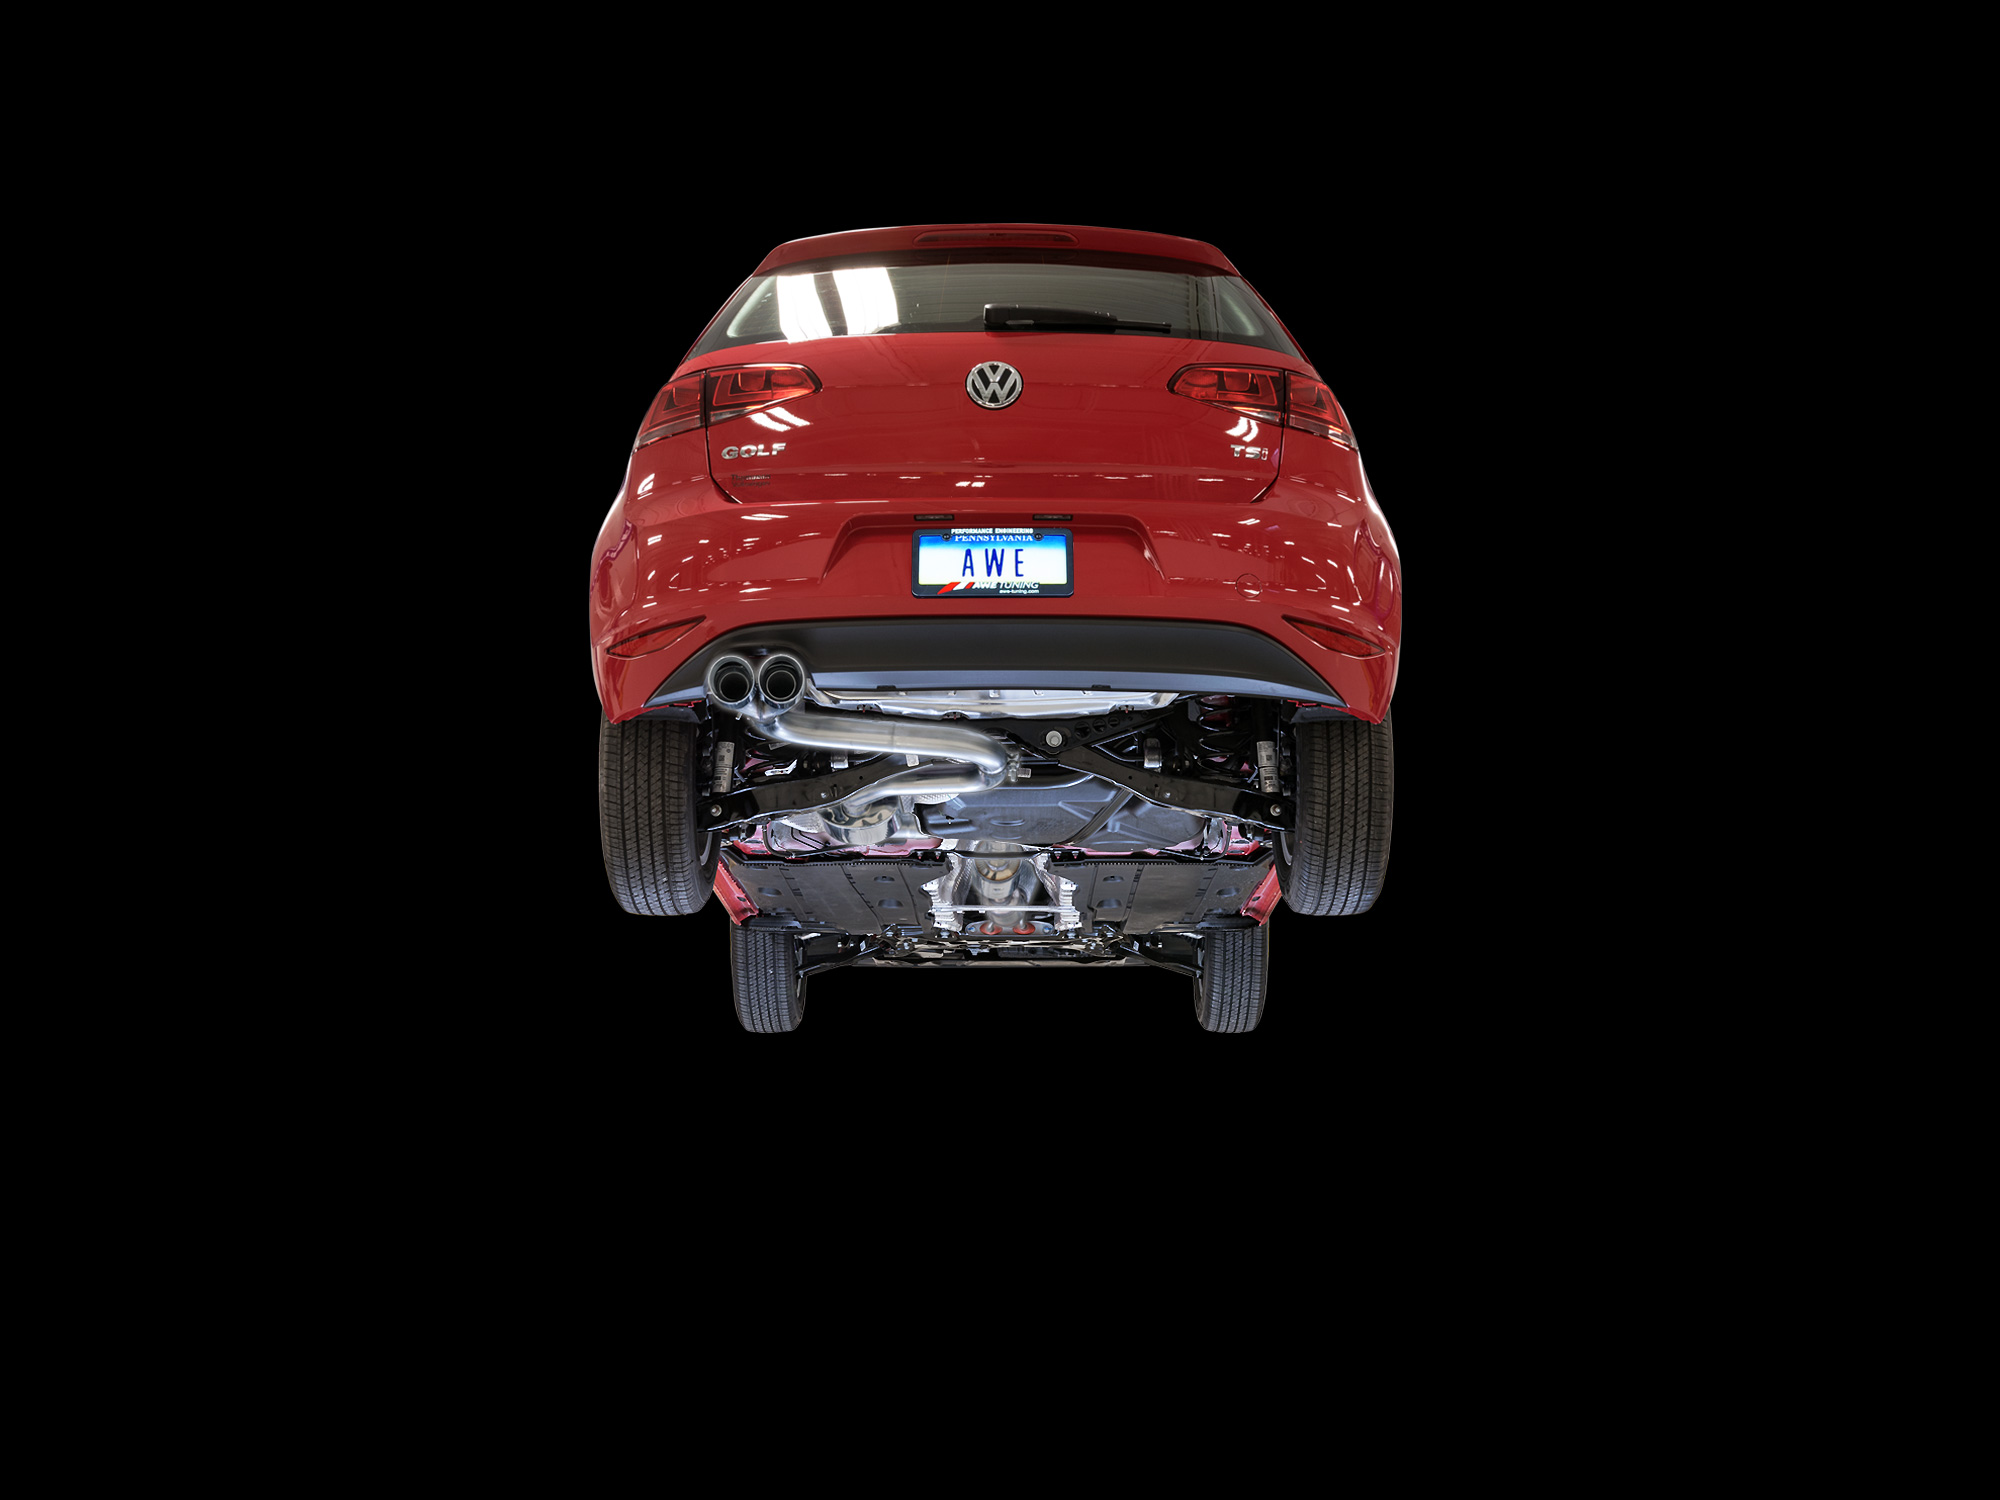 AWE Tuning Mk7 Golf 1.8T Exhaust Suite